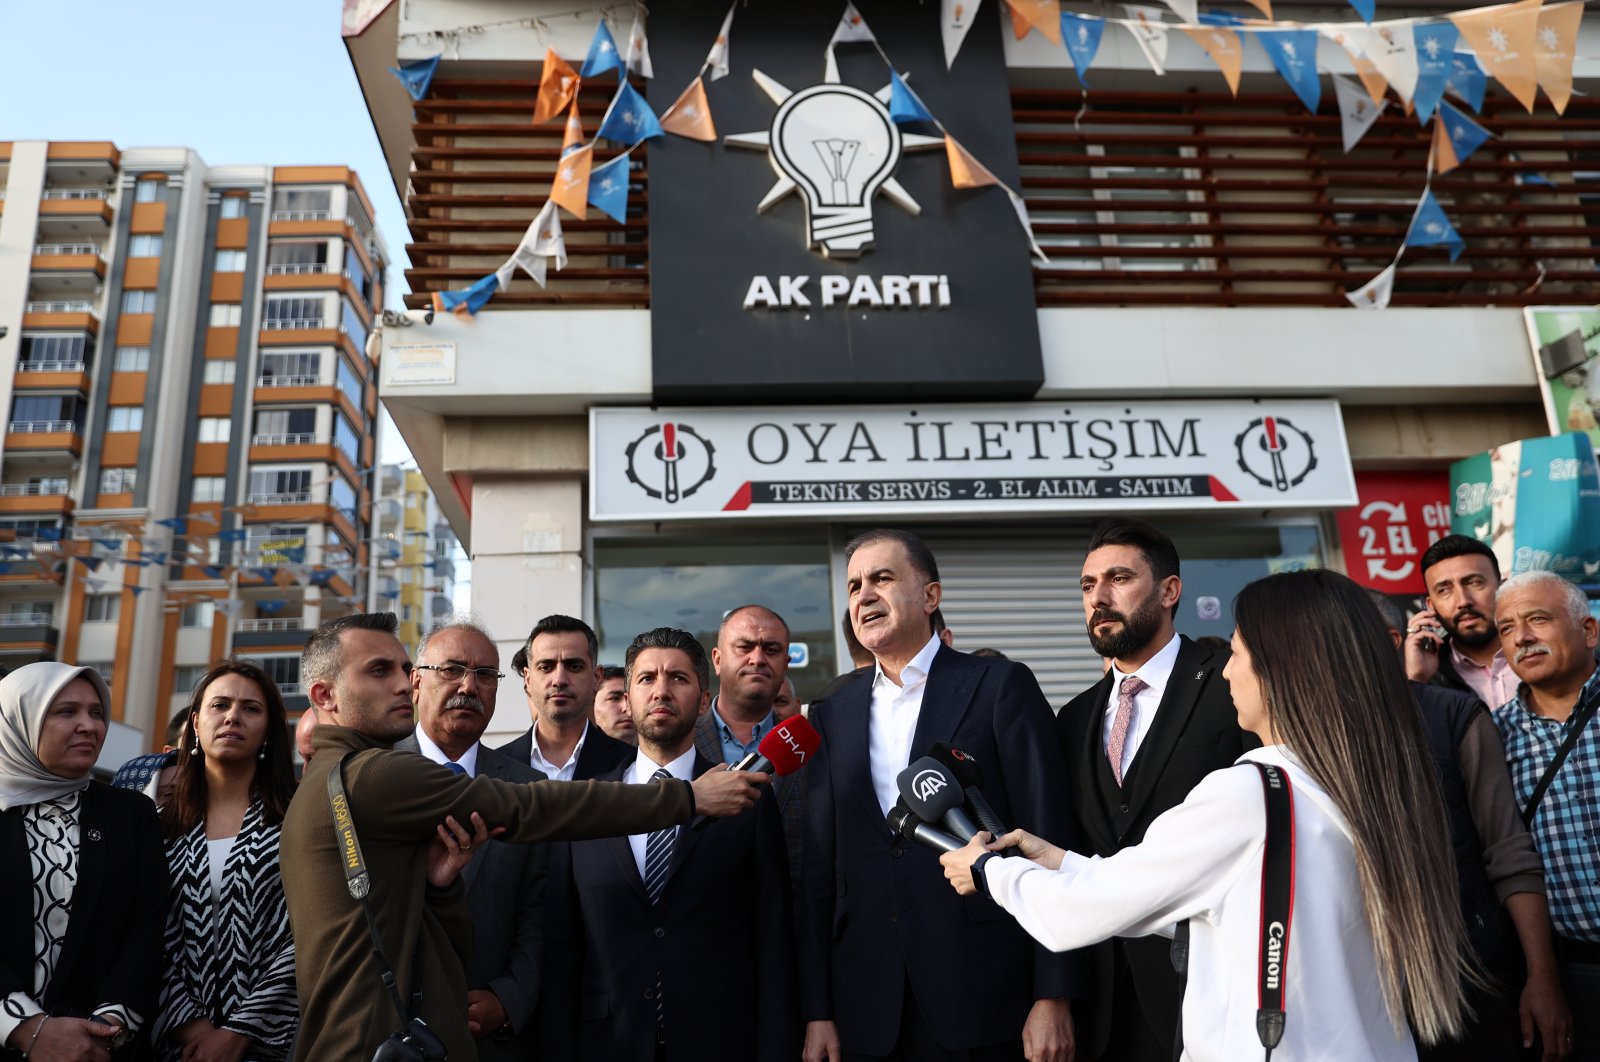 AK Party Spokesman Ömer Çelik speaks to reporters in front of the AK Party Çukurova district headquarters, which was targeted in an armed attack, Thursday, April 20, 2023. (AA Photo)